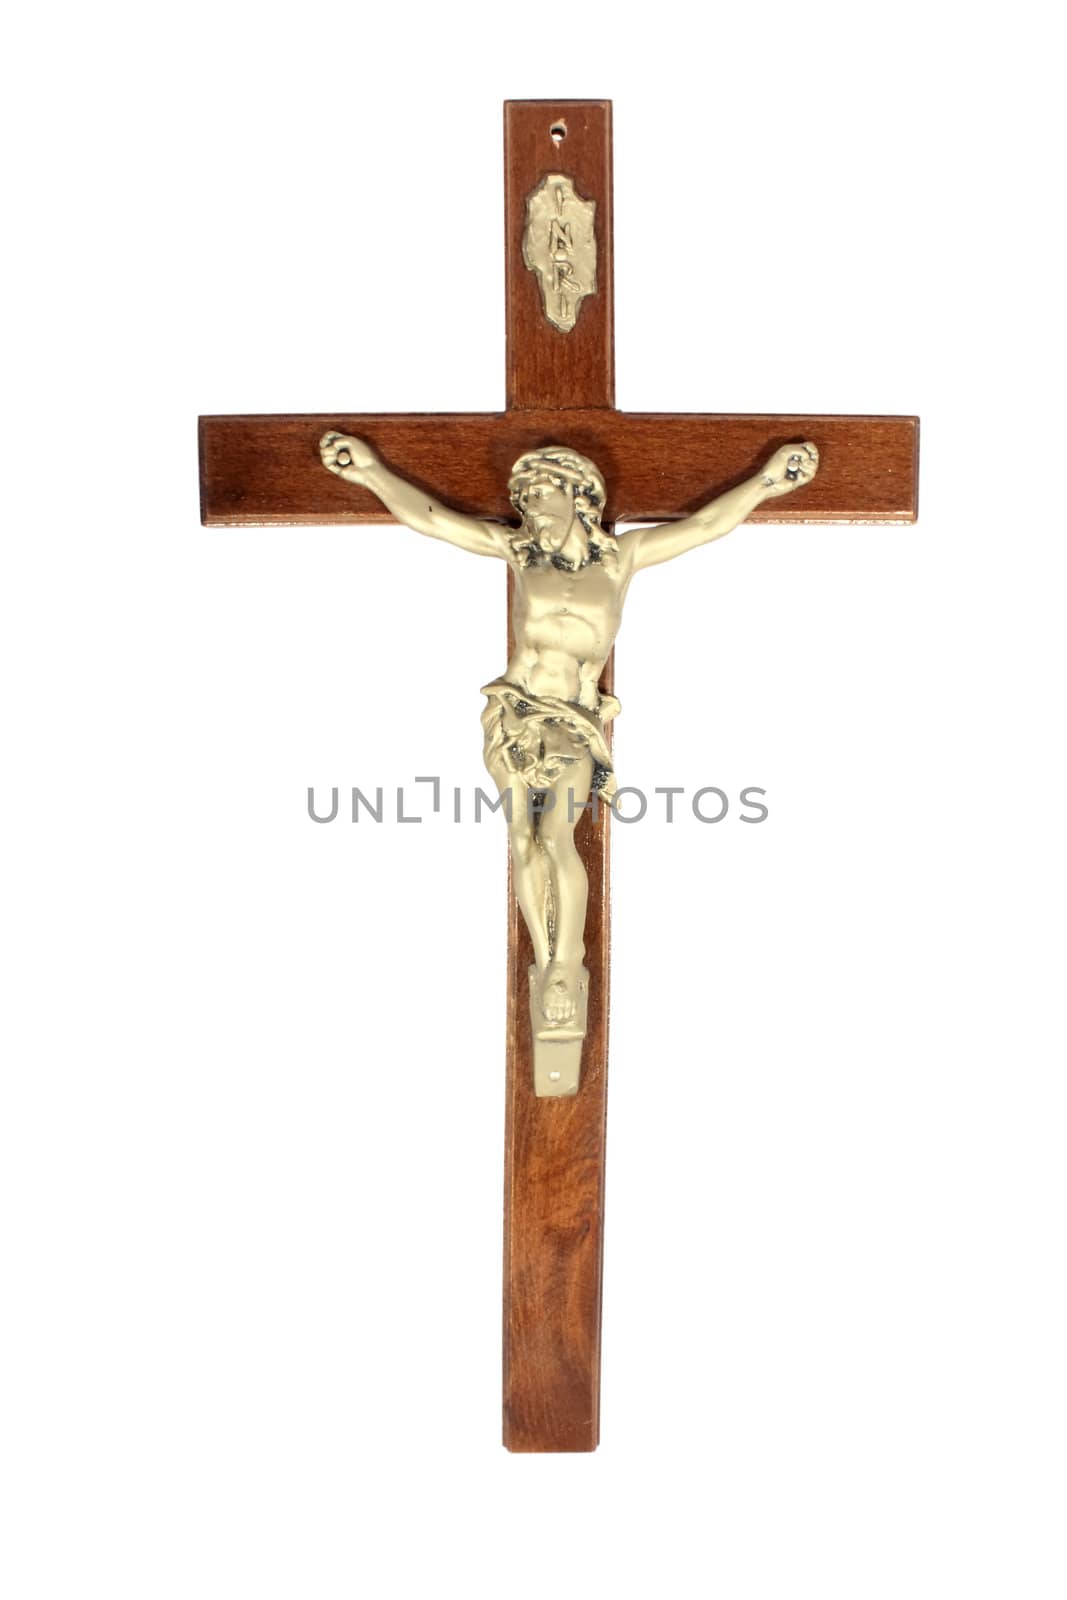 A crucifix isolated on white background